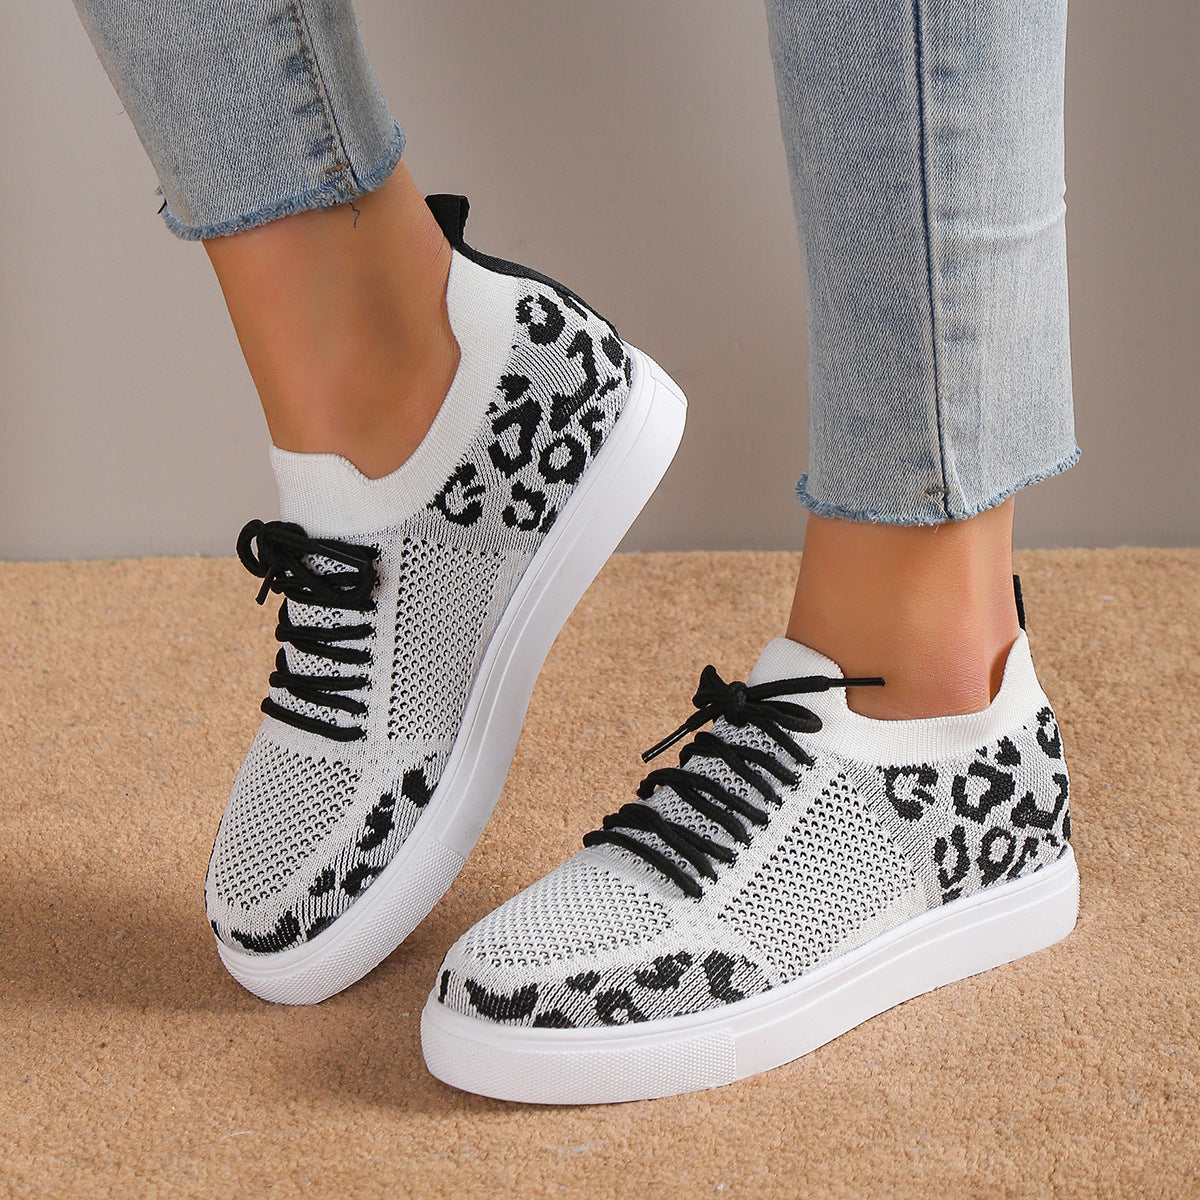 Lace-Up Leopard Flat Sneakers Shoes & Bags